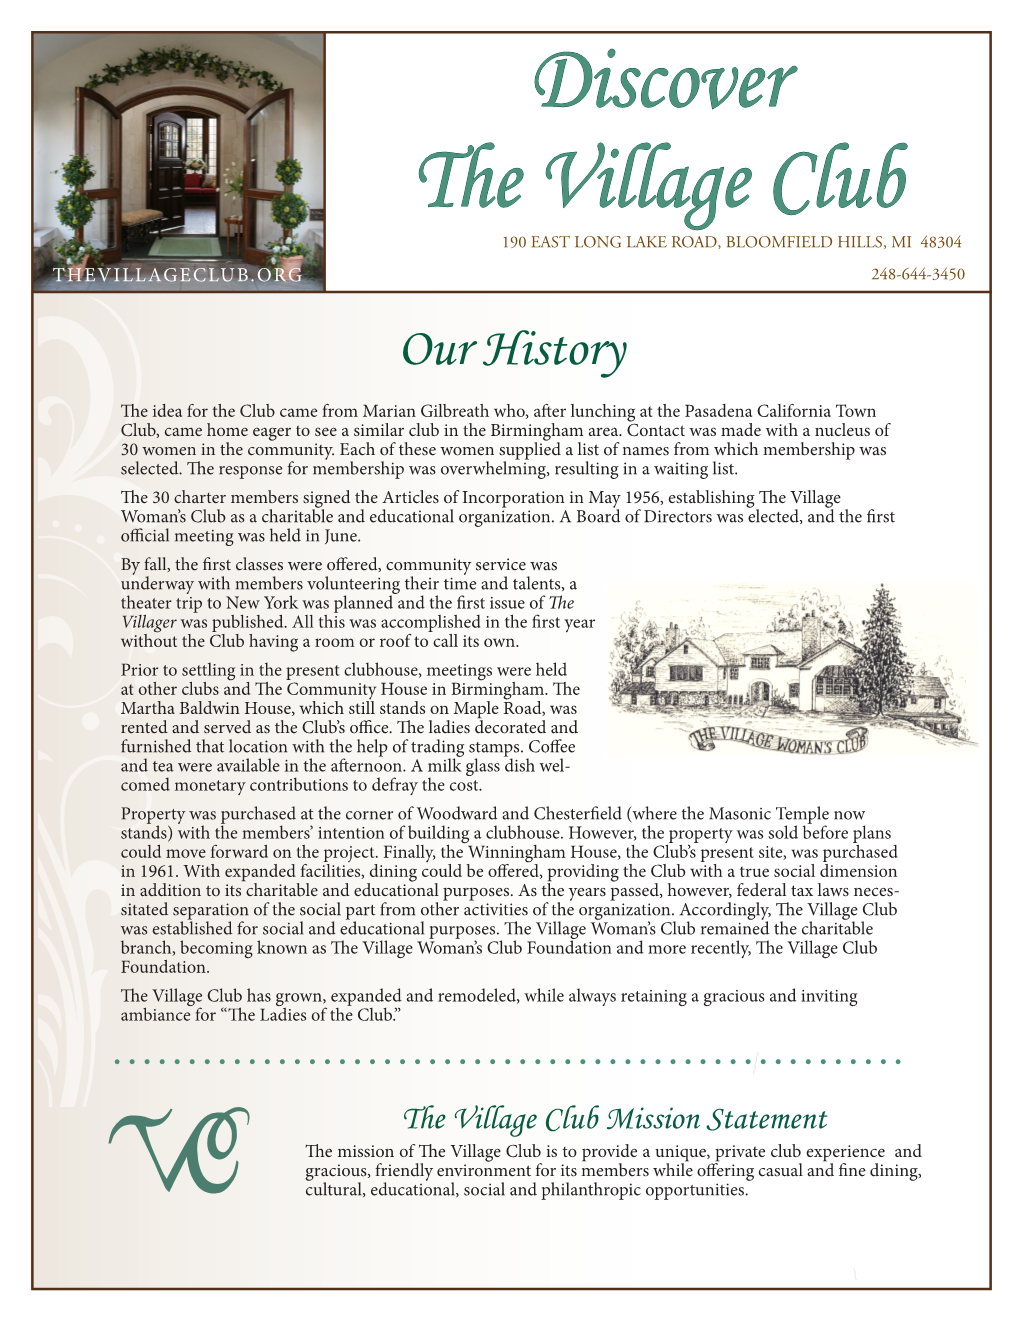 Discover the Village Club 190 EAST LONG LAKE ROAD, BLOOMFIELD HILLS, MI 48304 THEVILLAGECLUB.ORG 248-644-3450 Our History